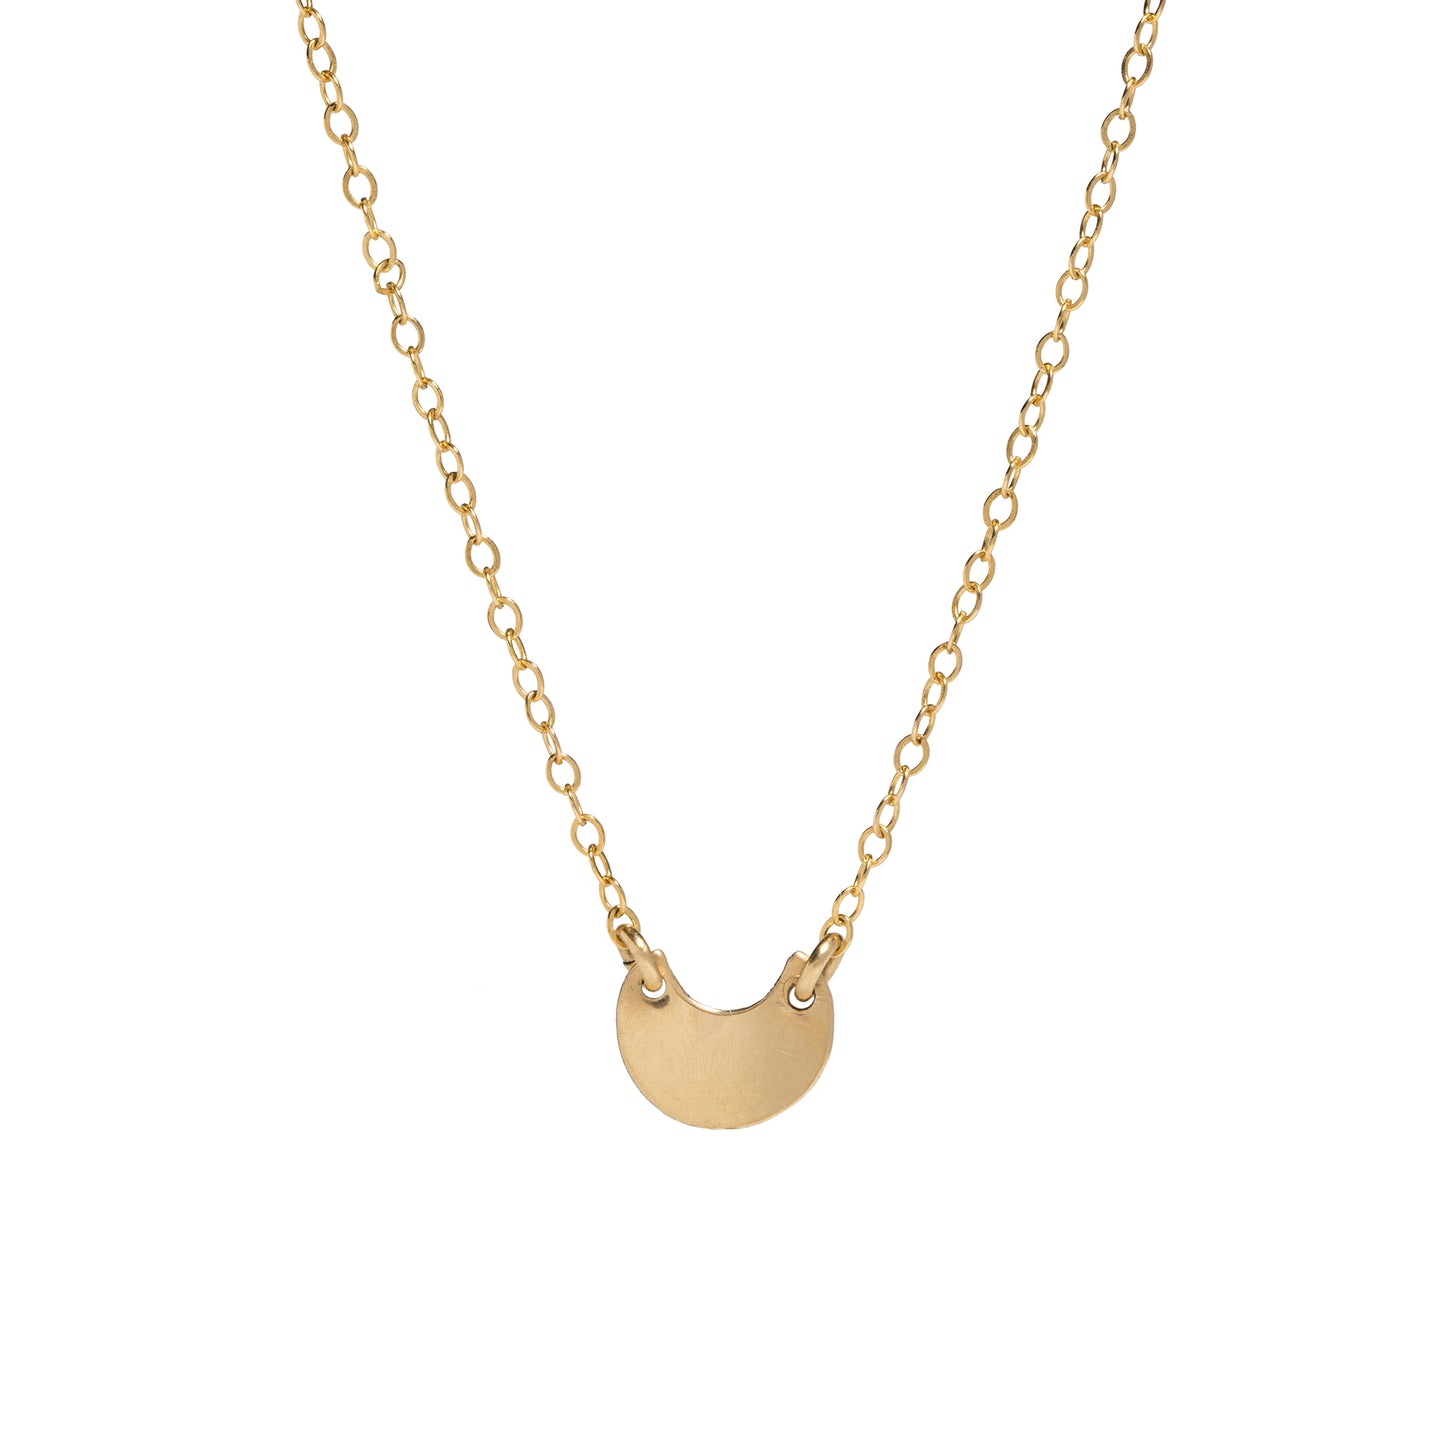 Mini Gold Crescent Necklace - Amy Jennings Designs